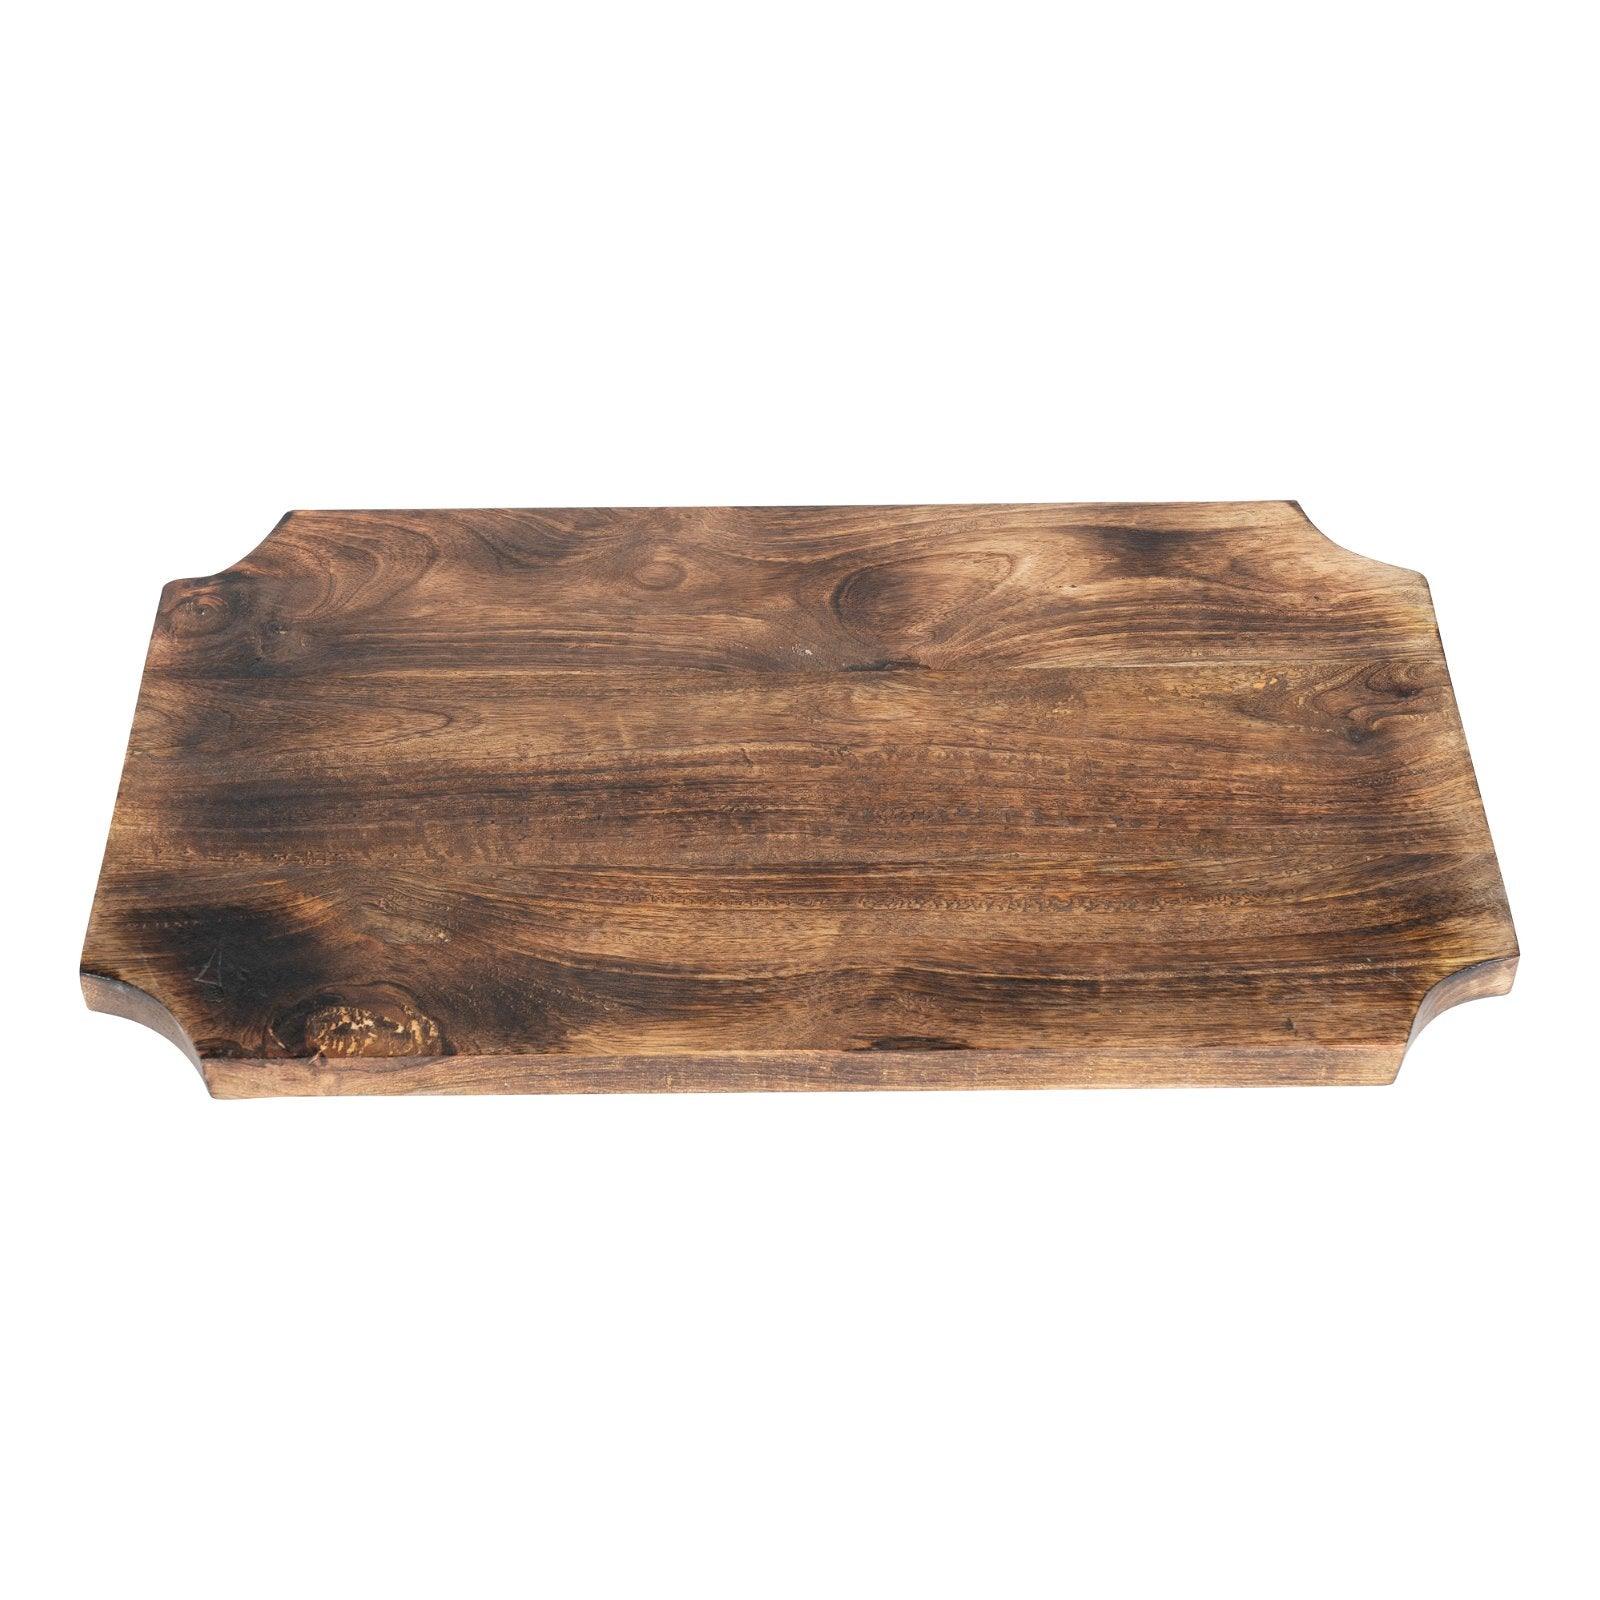 Wooden Distressed Chopping Board On Legs 39cm - £28.99 - Trays & Chopping Boards 